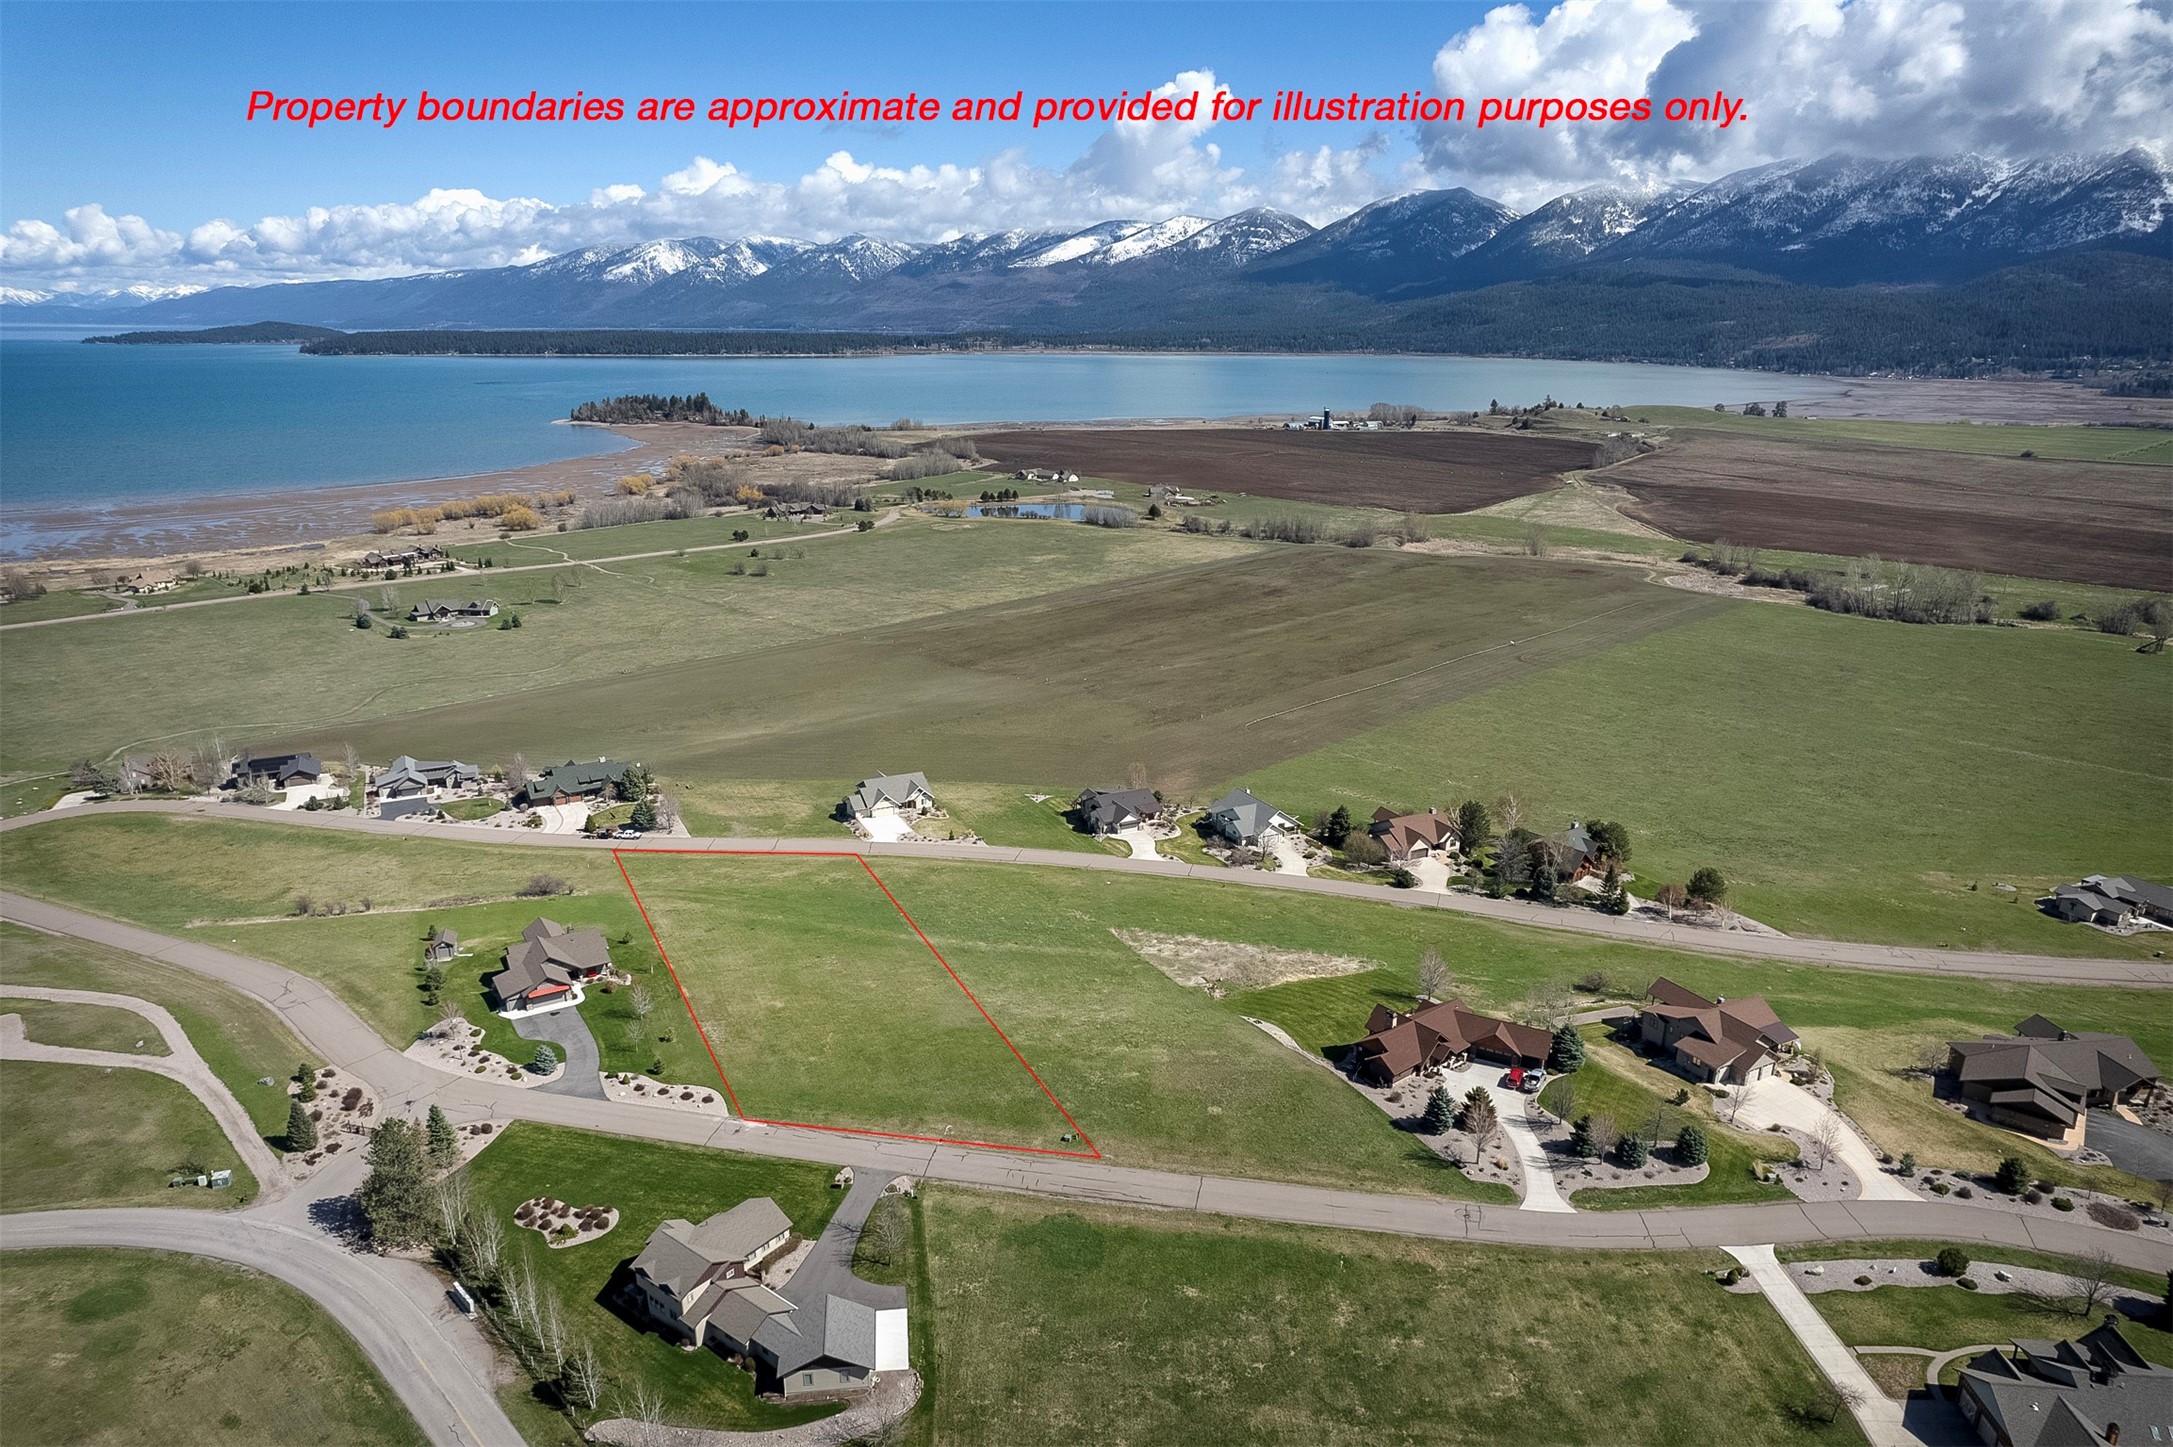 Come immerse yourself in the exclusive Mission Bay Preserve lifestyle from this spacious 1.5-acre lot with panoramic lake and Mission Mountain views!  The Preserve is a sought-after community within the Mission Bay development, a golf and outdoor enthusiast subdivision located at the southern end of beautiful Flathead Lake in Polson Mt.  The Preserve was conceptualized as a high-end residential community, prioritizing wilderness conservation as the cornerstone for development planning to capitalize on the natural beauty of the surrounding landscapes.  Amenities exclusively offered to members of the Mission Bay Preserve include access to Polson’s renowned 27-hole golf course, club house, fitness center, tennis courts, swimming pool, dedicated open space common areas, private Flathead Lake access, and many more!  City water and sewer services to lot- come build your dream home from this gently sloped, hard to find property! Call Cole Wallace, 406-570-7321, or your real estate professional for additional details.